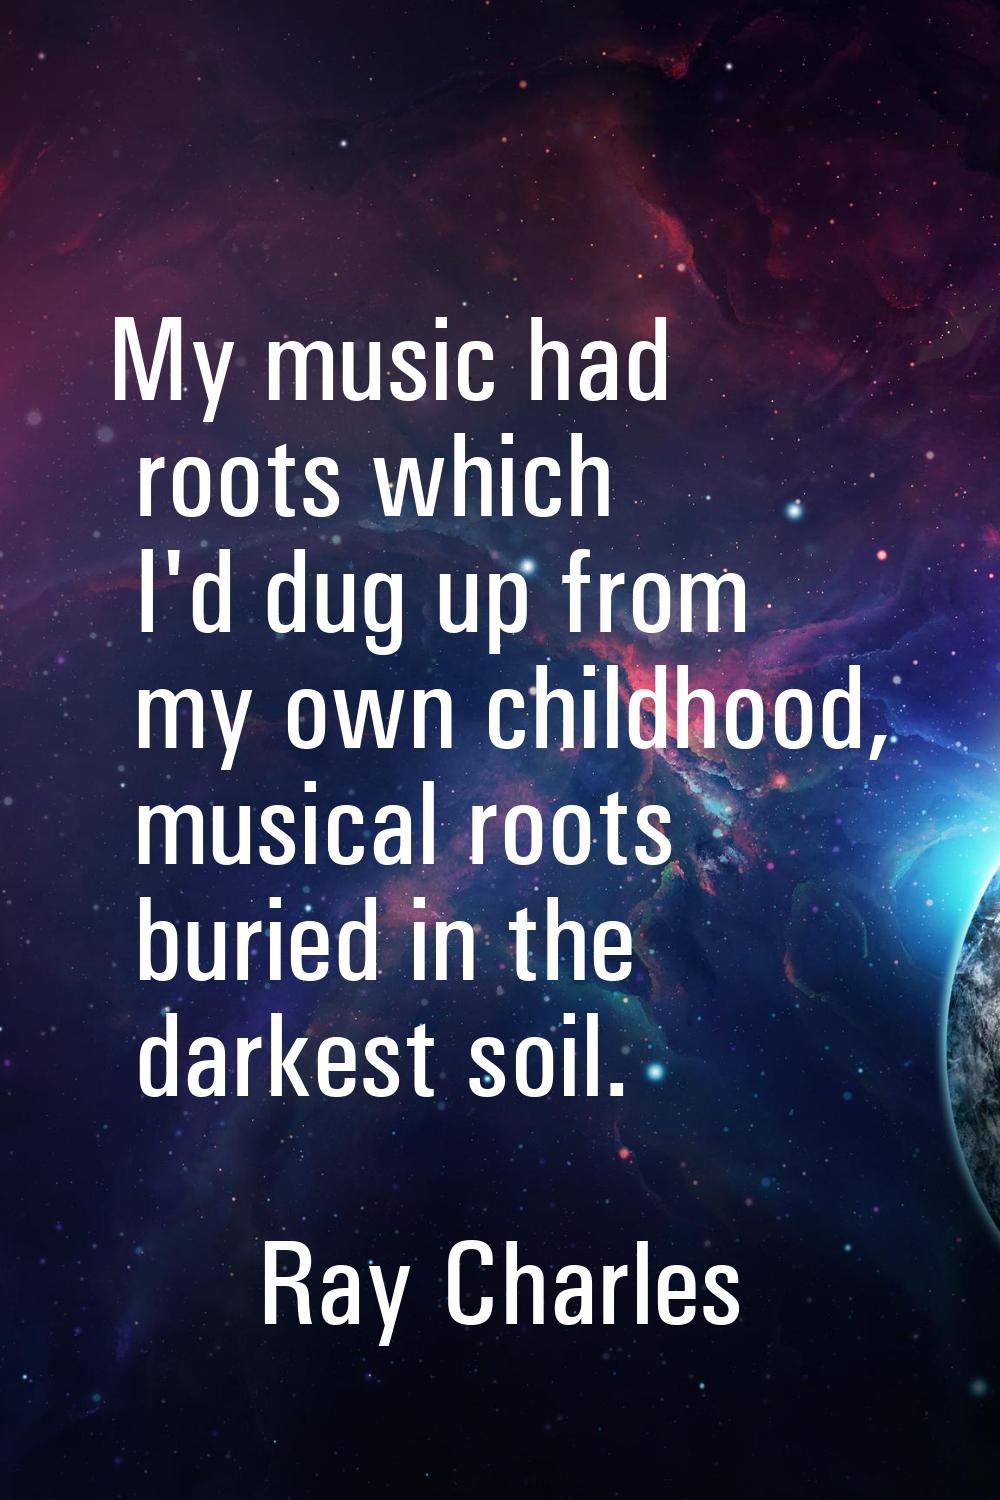 My music had roots which I'd dug up from my own childhood, musical roots buried in the darkest soil